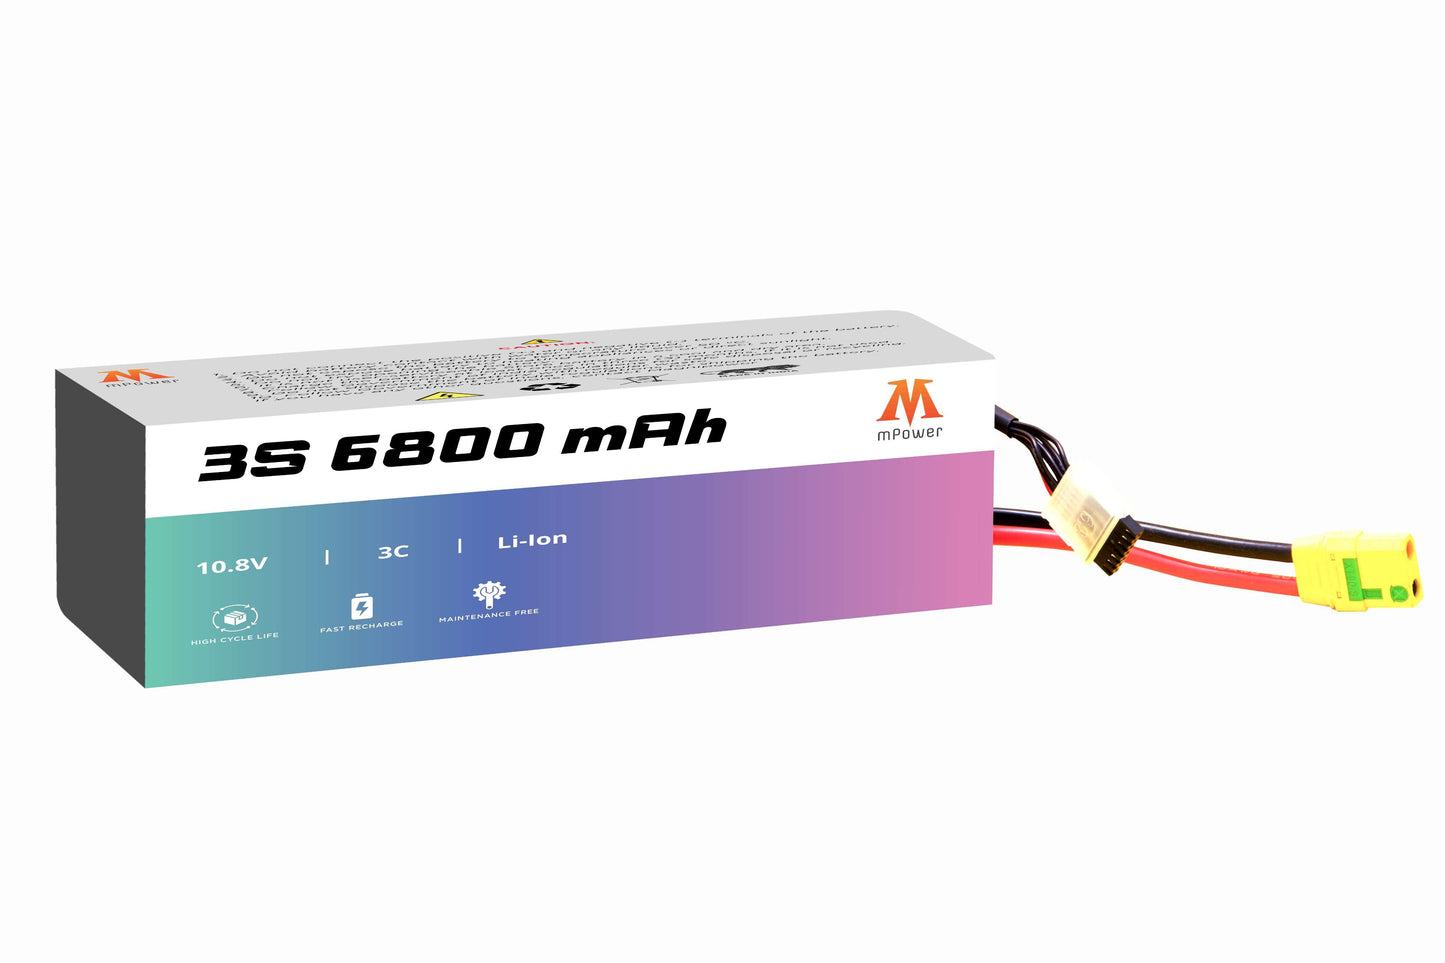 mPower 3S 6800mAh Lithium-Ion Battery for Survey Drones